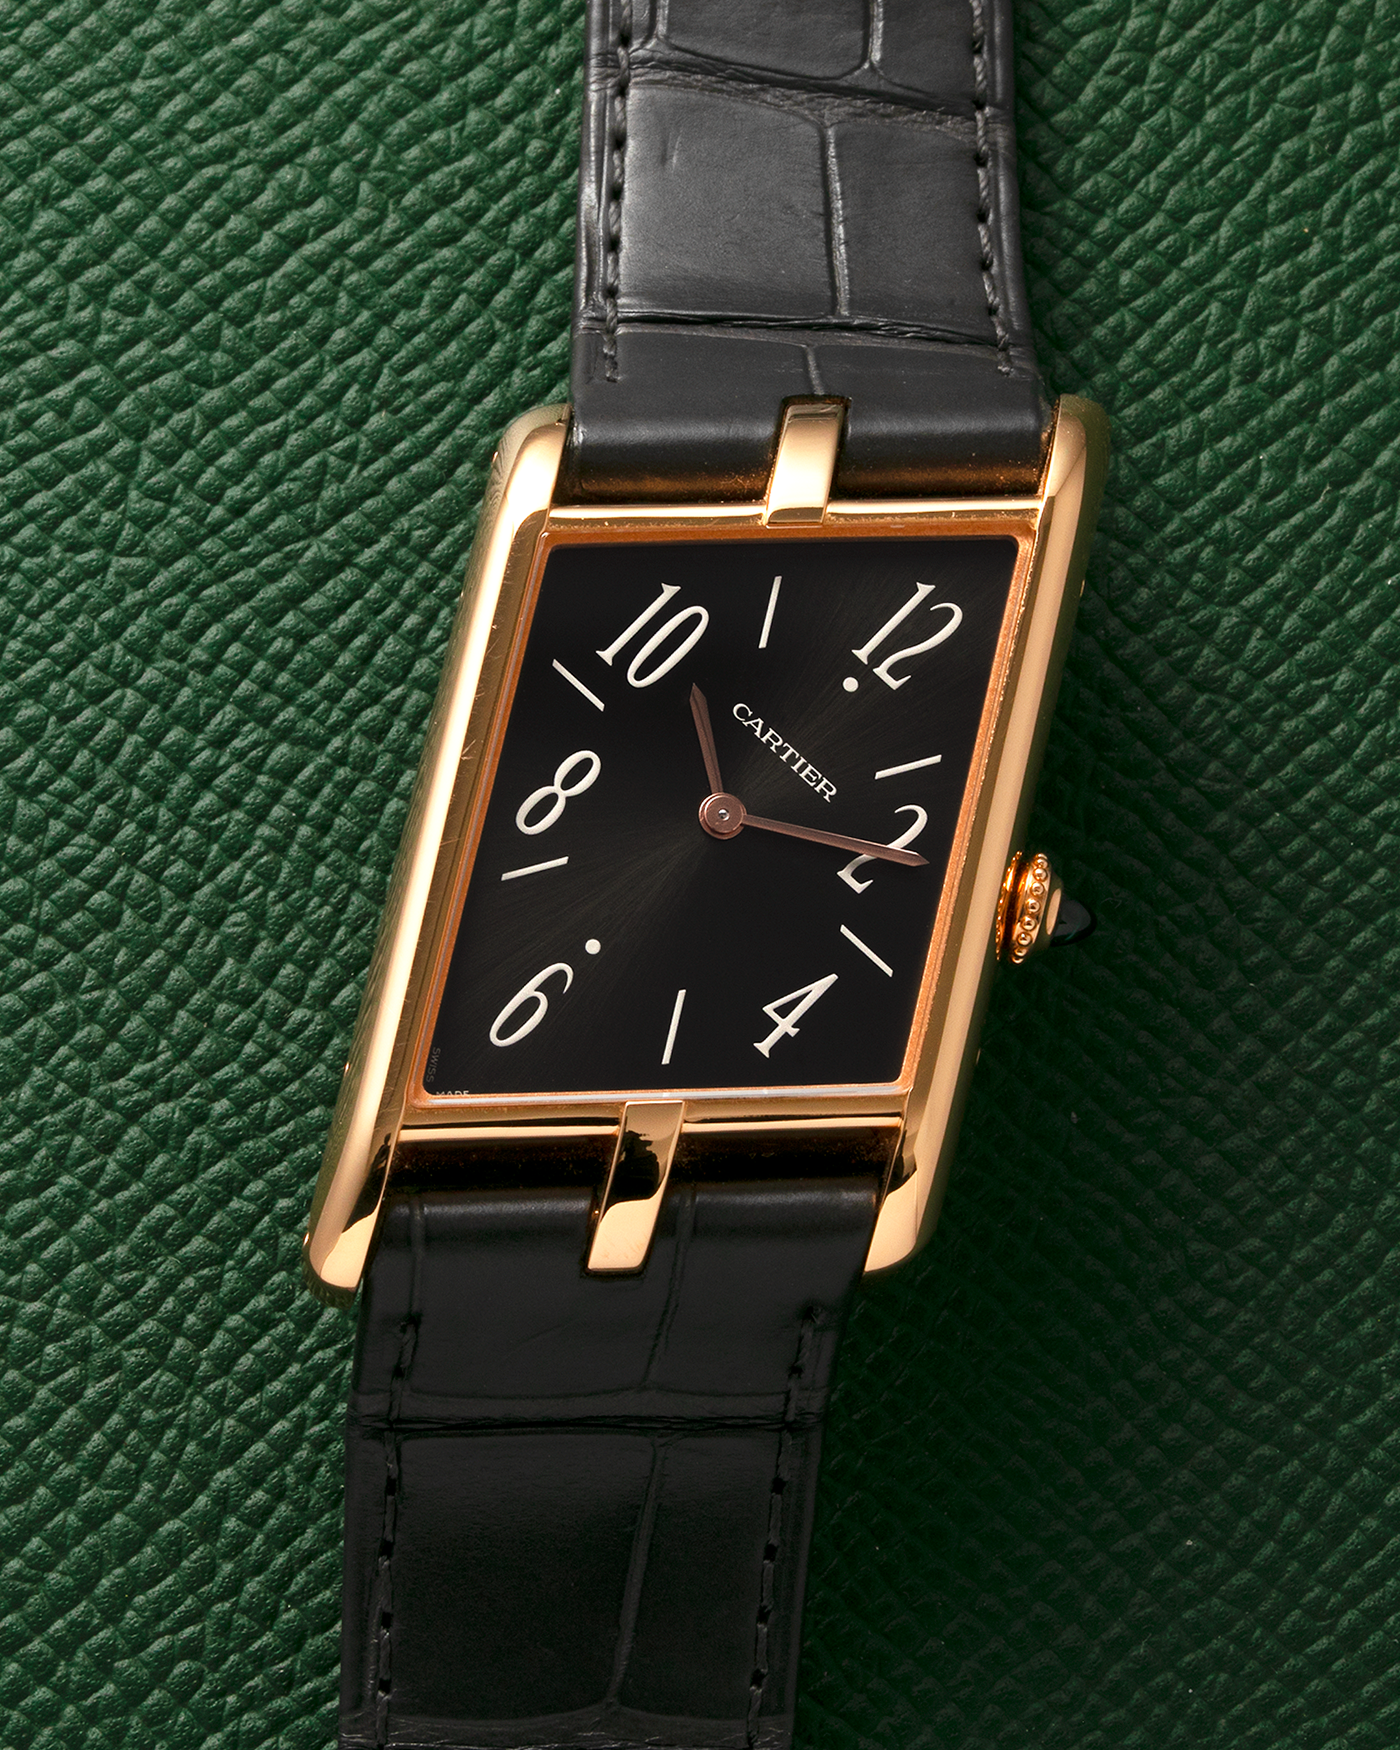 Brand: Cartier Year: 2022 Model: Privé Tank Asymétrique Reference: WGTA0043 Material: 18-carat Red Gold Movement: Cal. 1917MC, Manual-Winding Case Diameter: 47.15mm x 26.2mm x 6.38mm Strap: Cartier Grey Alligator Leather Strap with Signed 18-carat Red Gold Tang Buckle